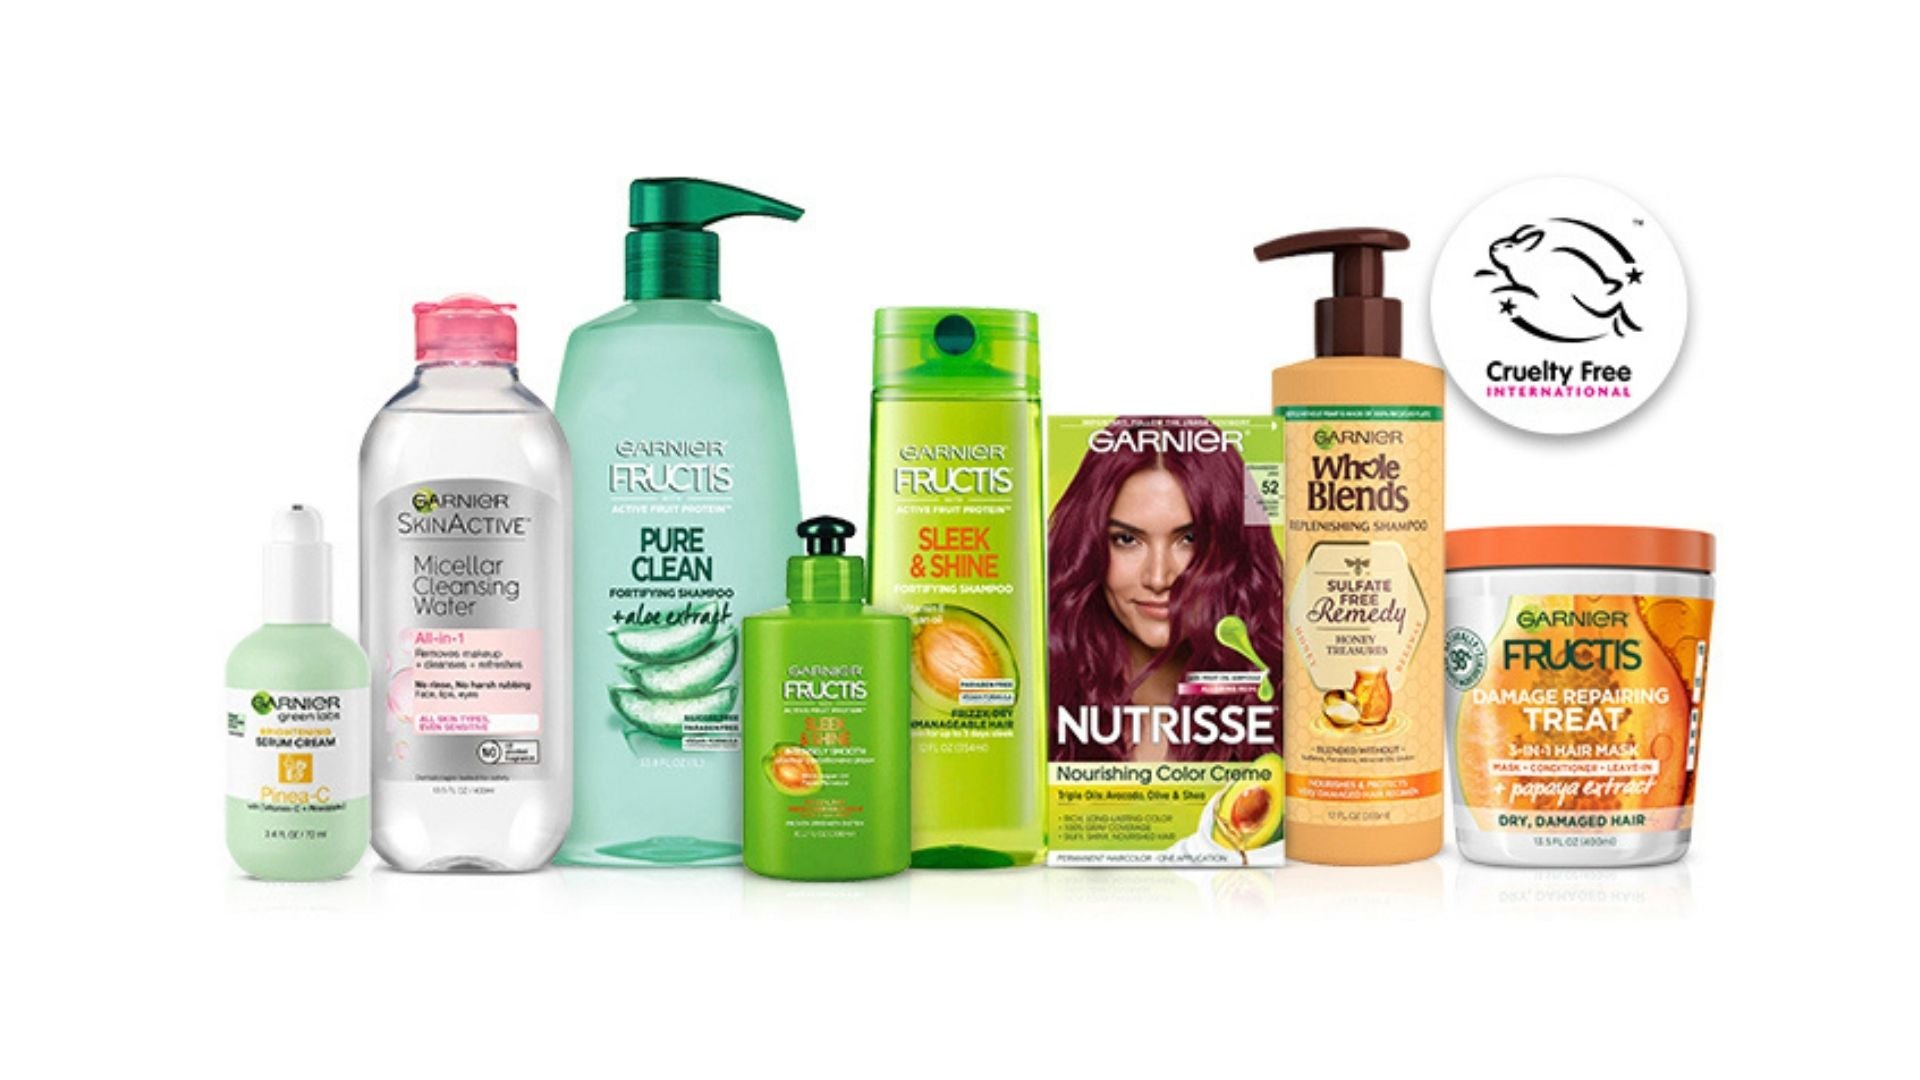 review, ingredients, photos, skincare, hair care, 2021, 2022, garnier, cruelty free, international leaping bunny program, end animal testing